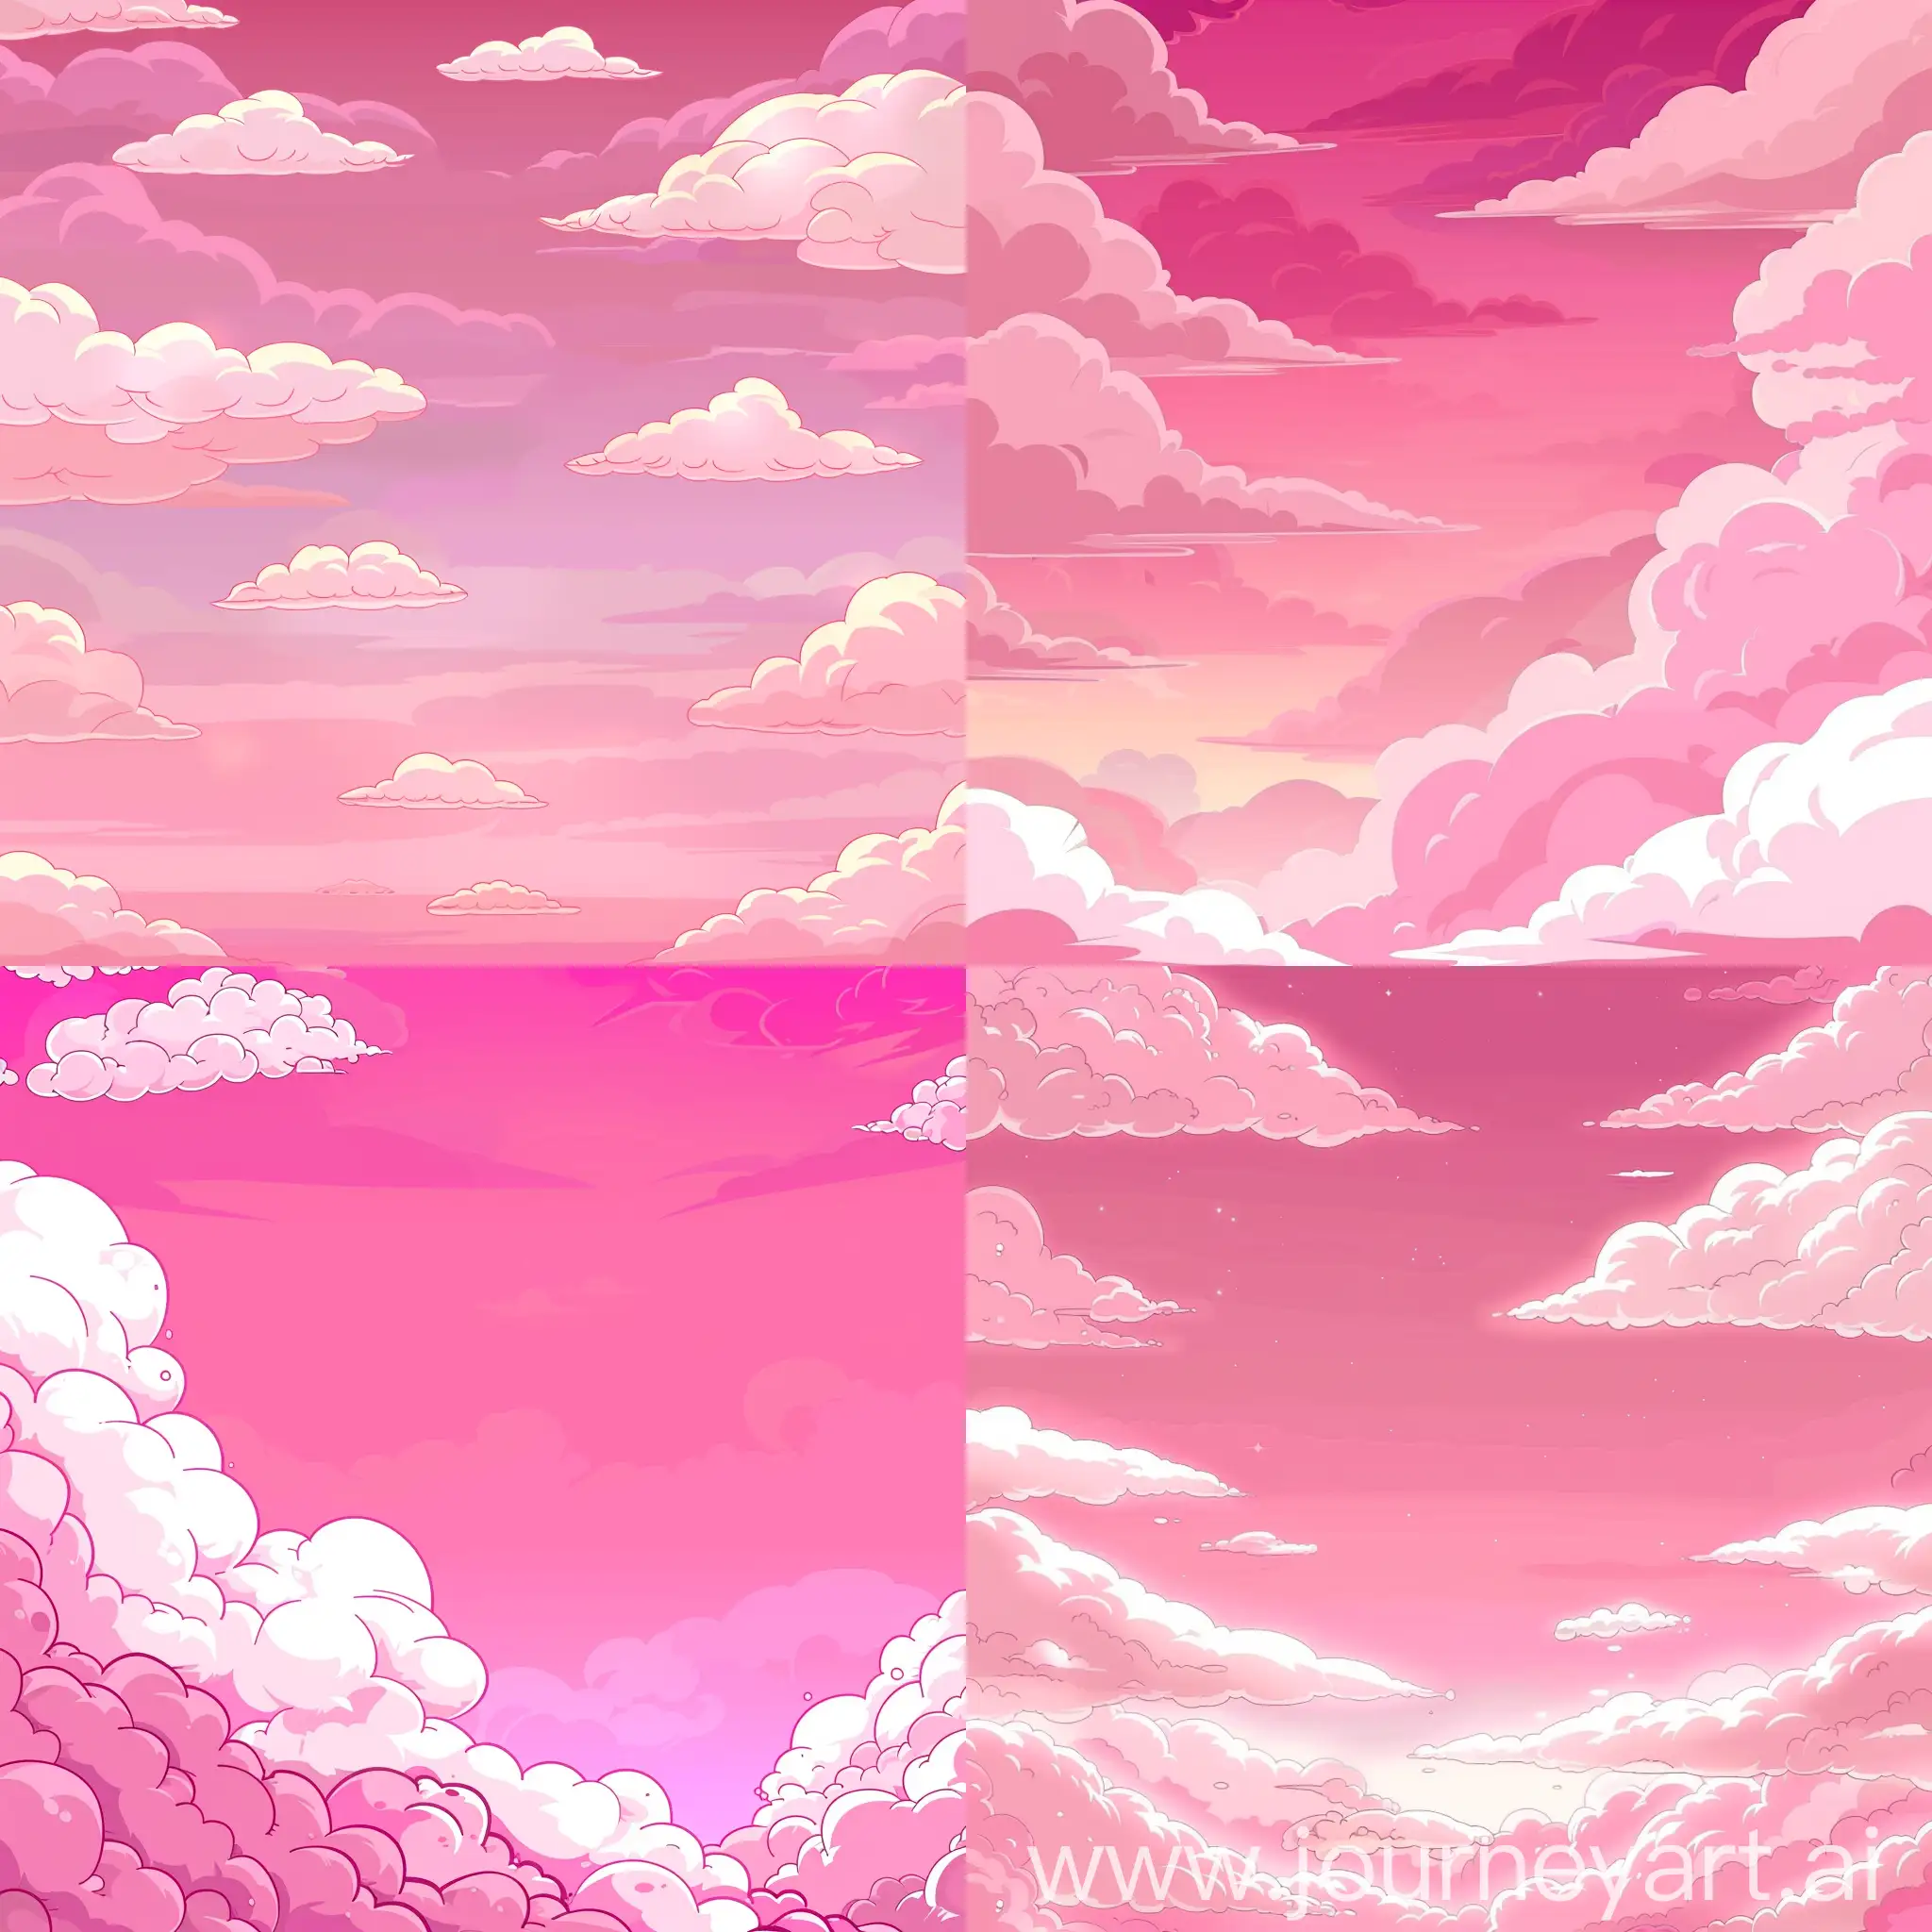 Cartoon-Pink-Sky-with-Glowing-White-Clouds